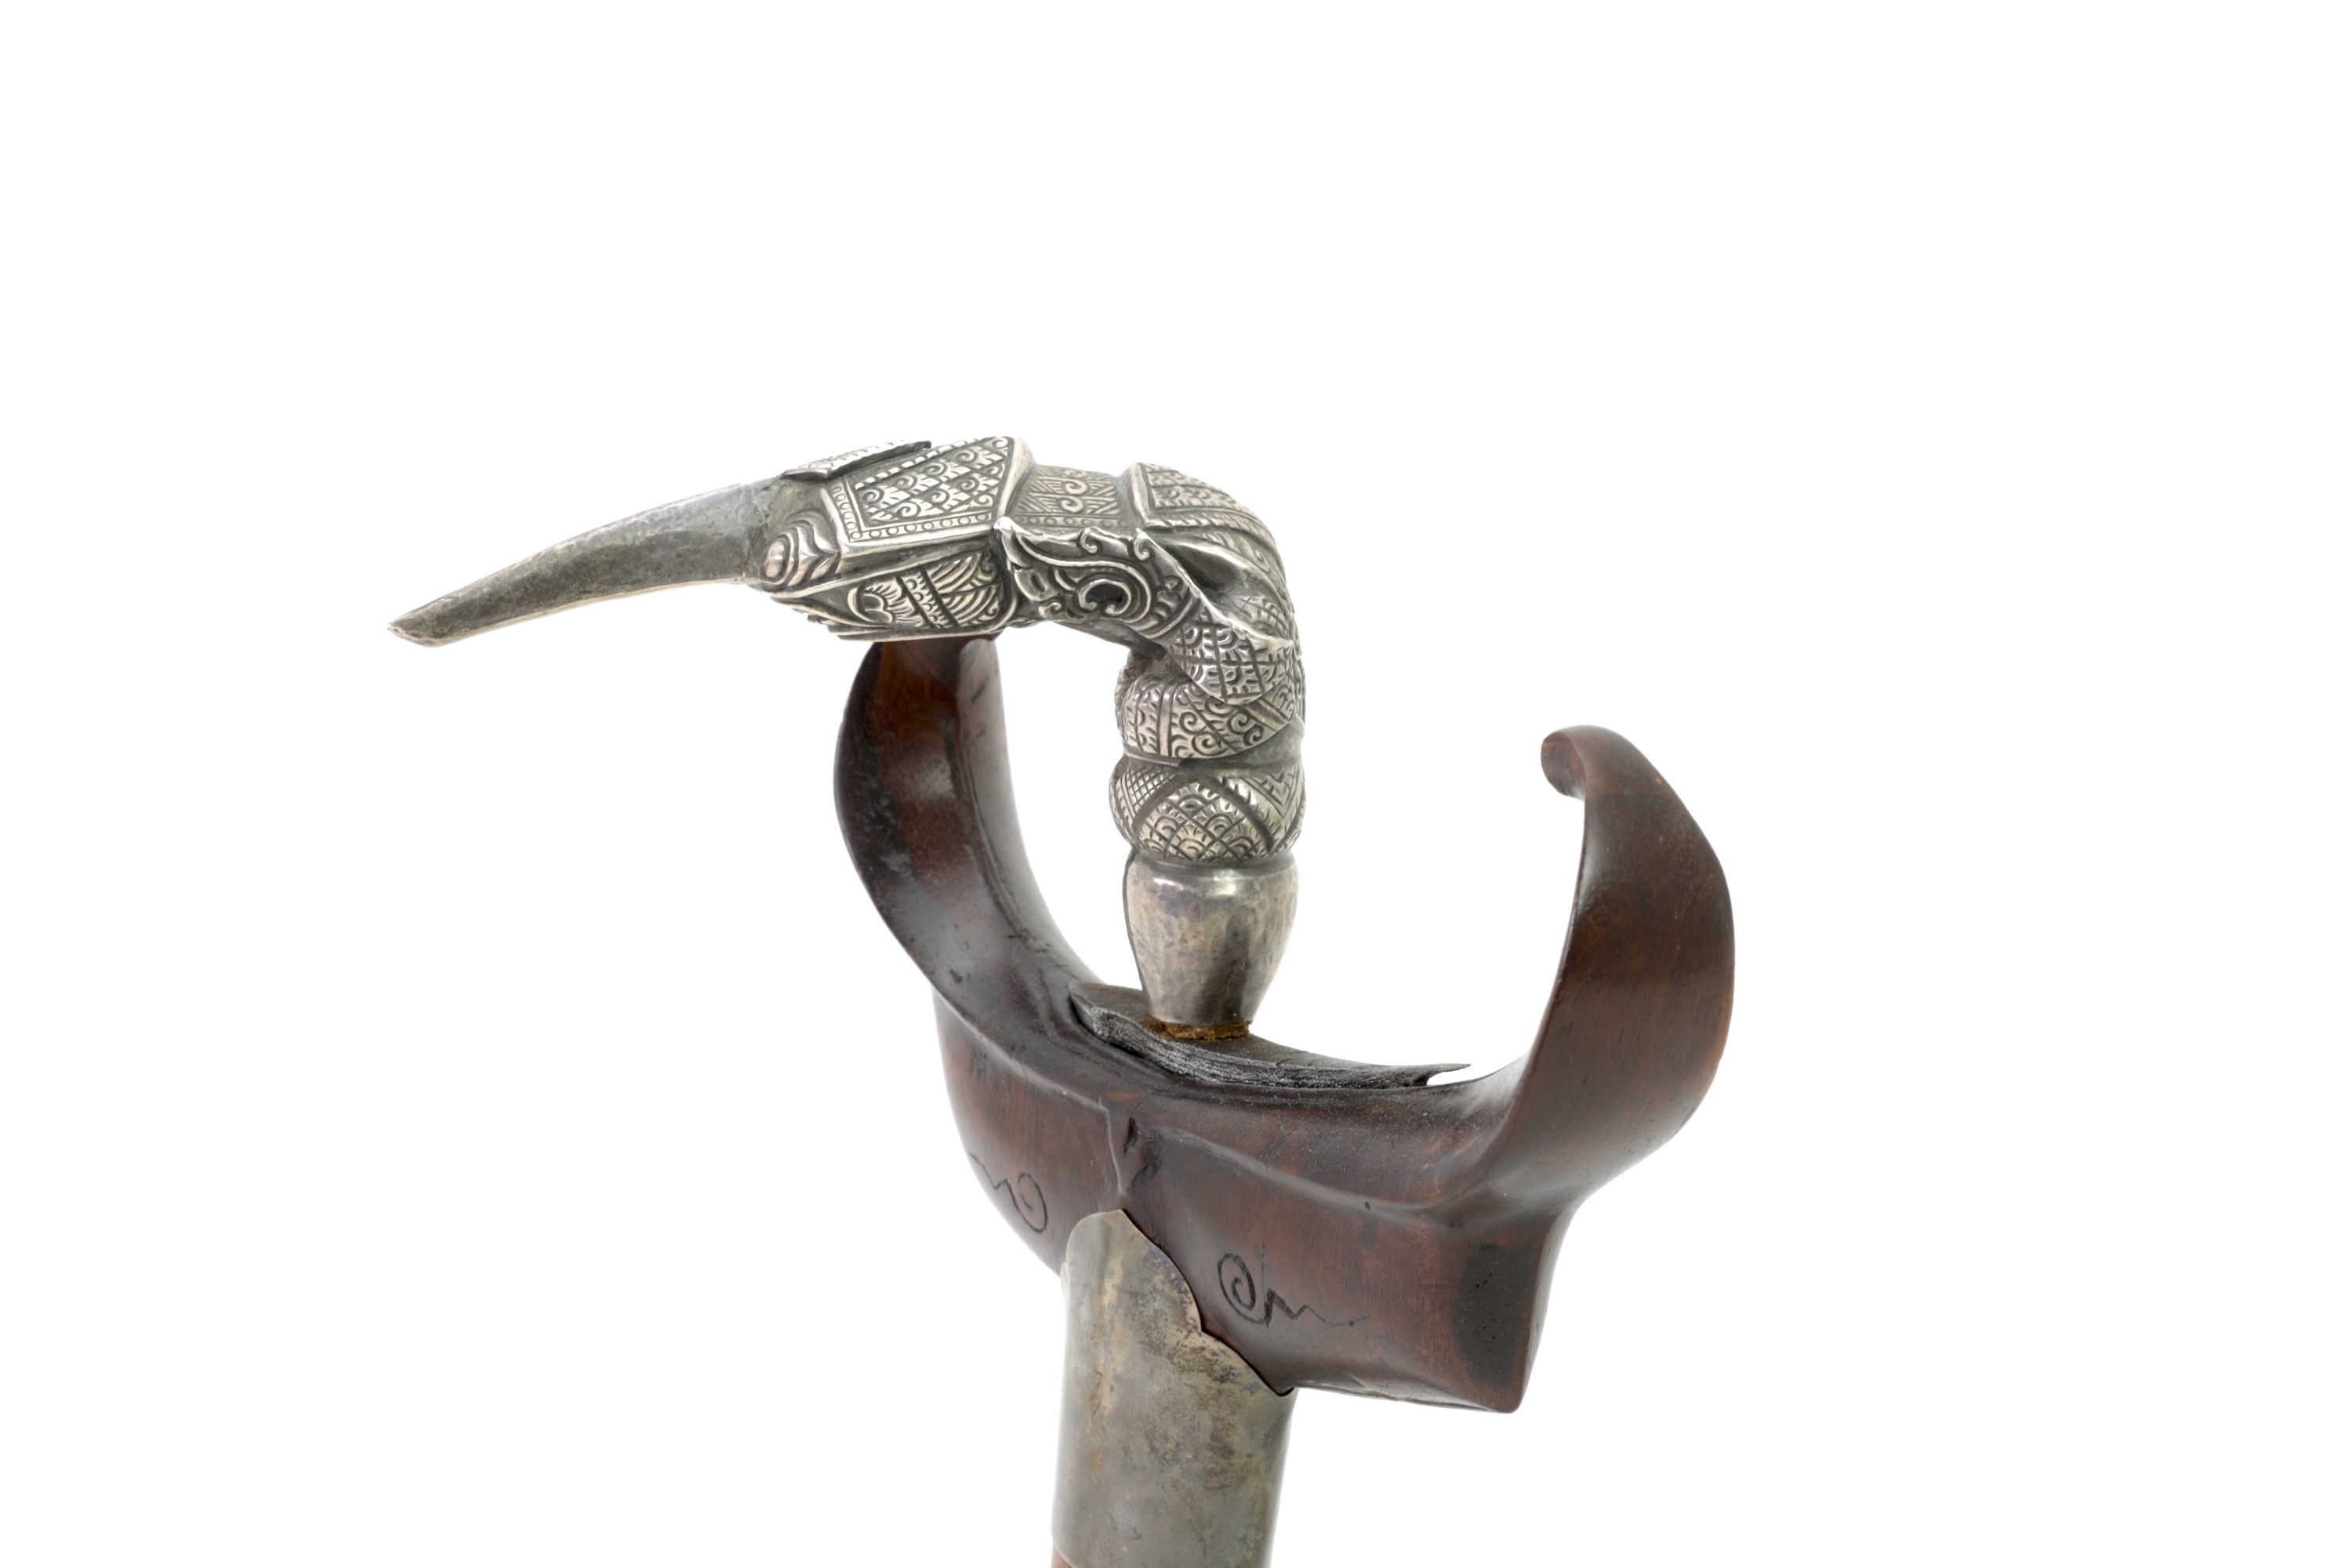 Early silver hilted keris coteng from Songhkla